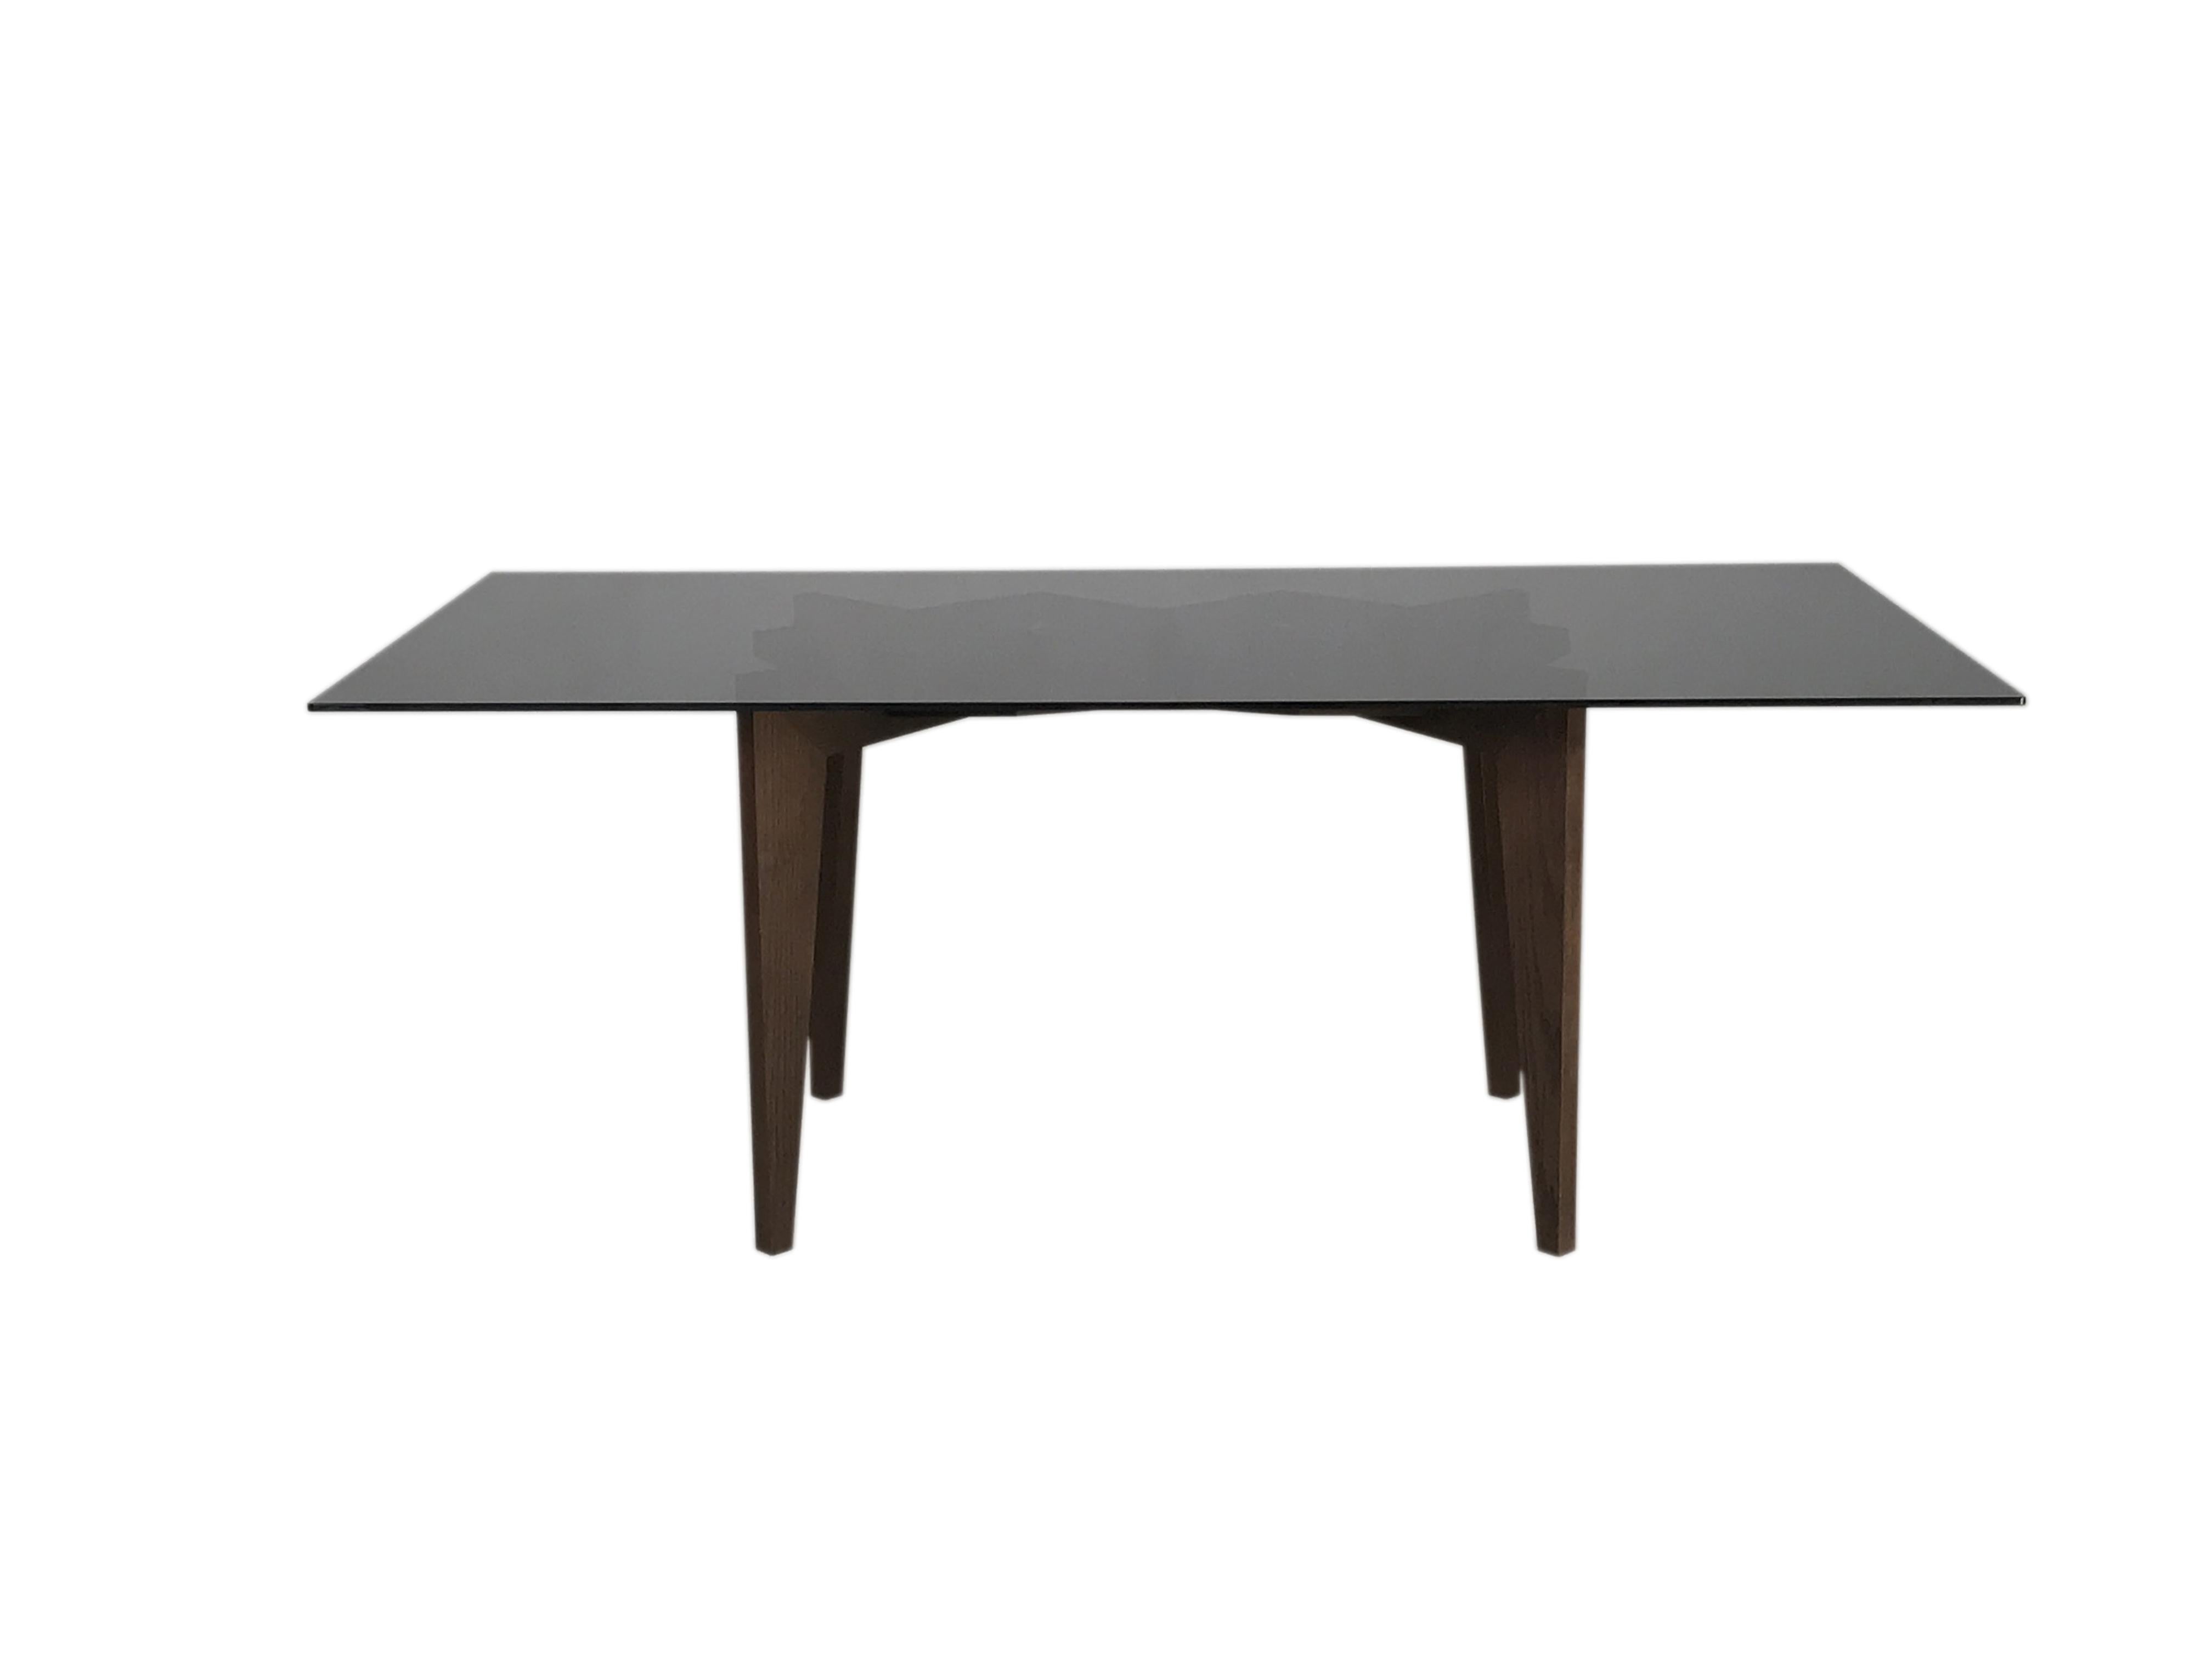 Spider is a contemporary table made of ashwood with interlocking legs made by wooden joints, and glass top.
 